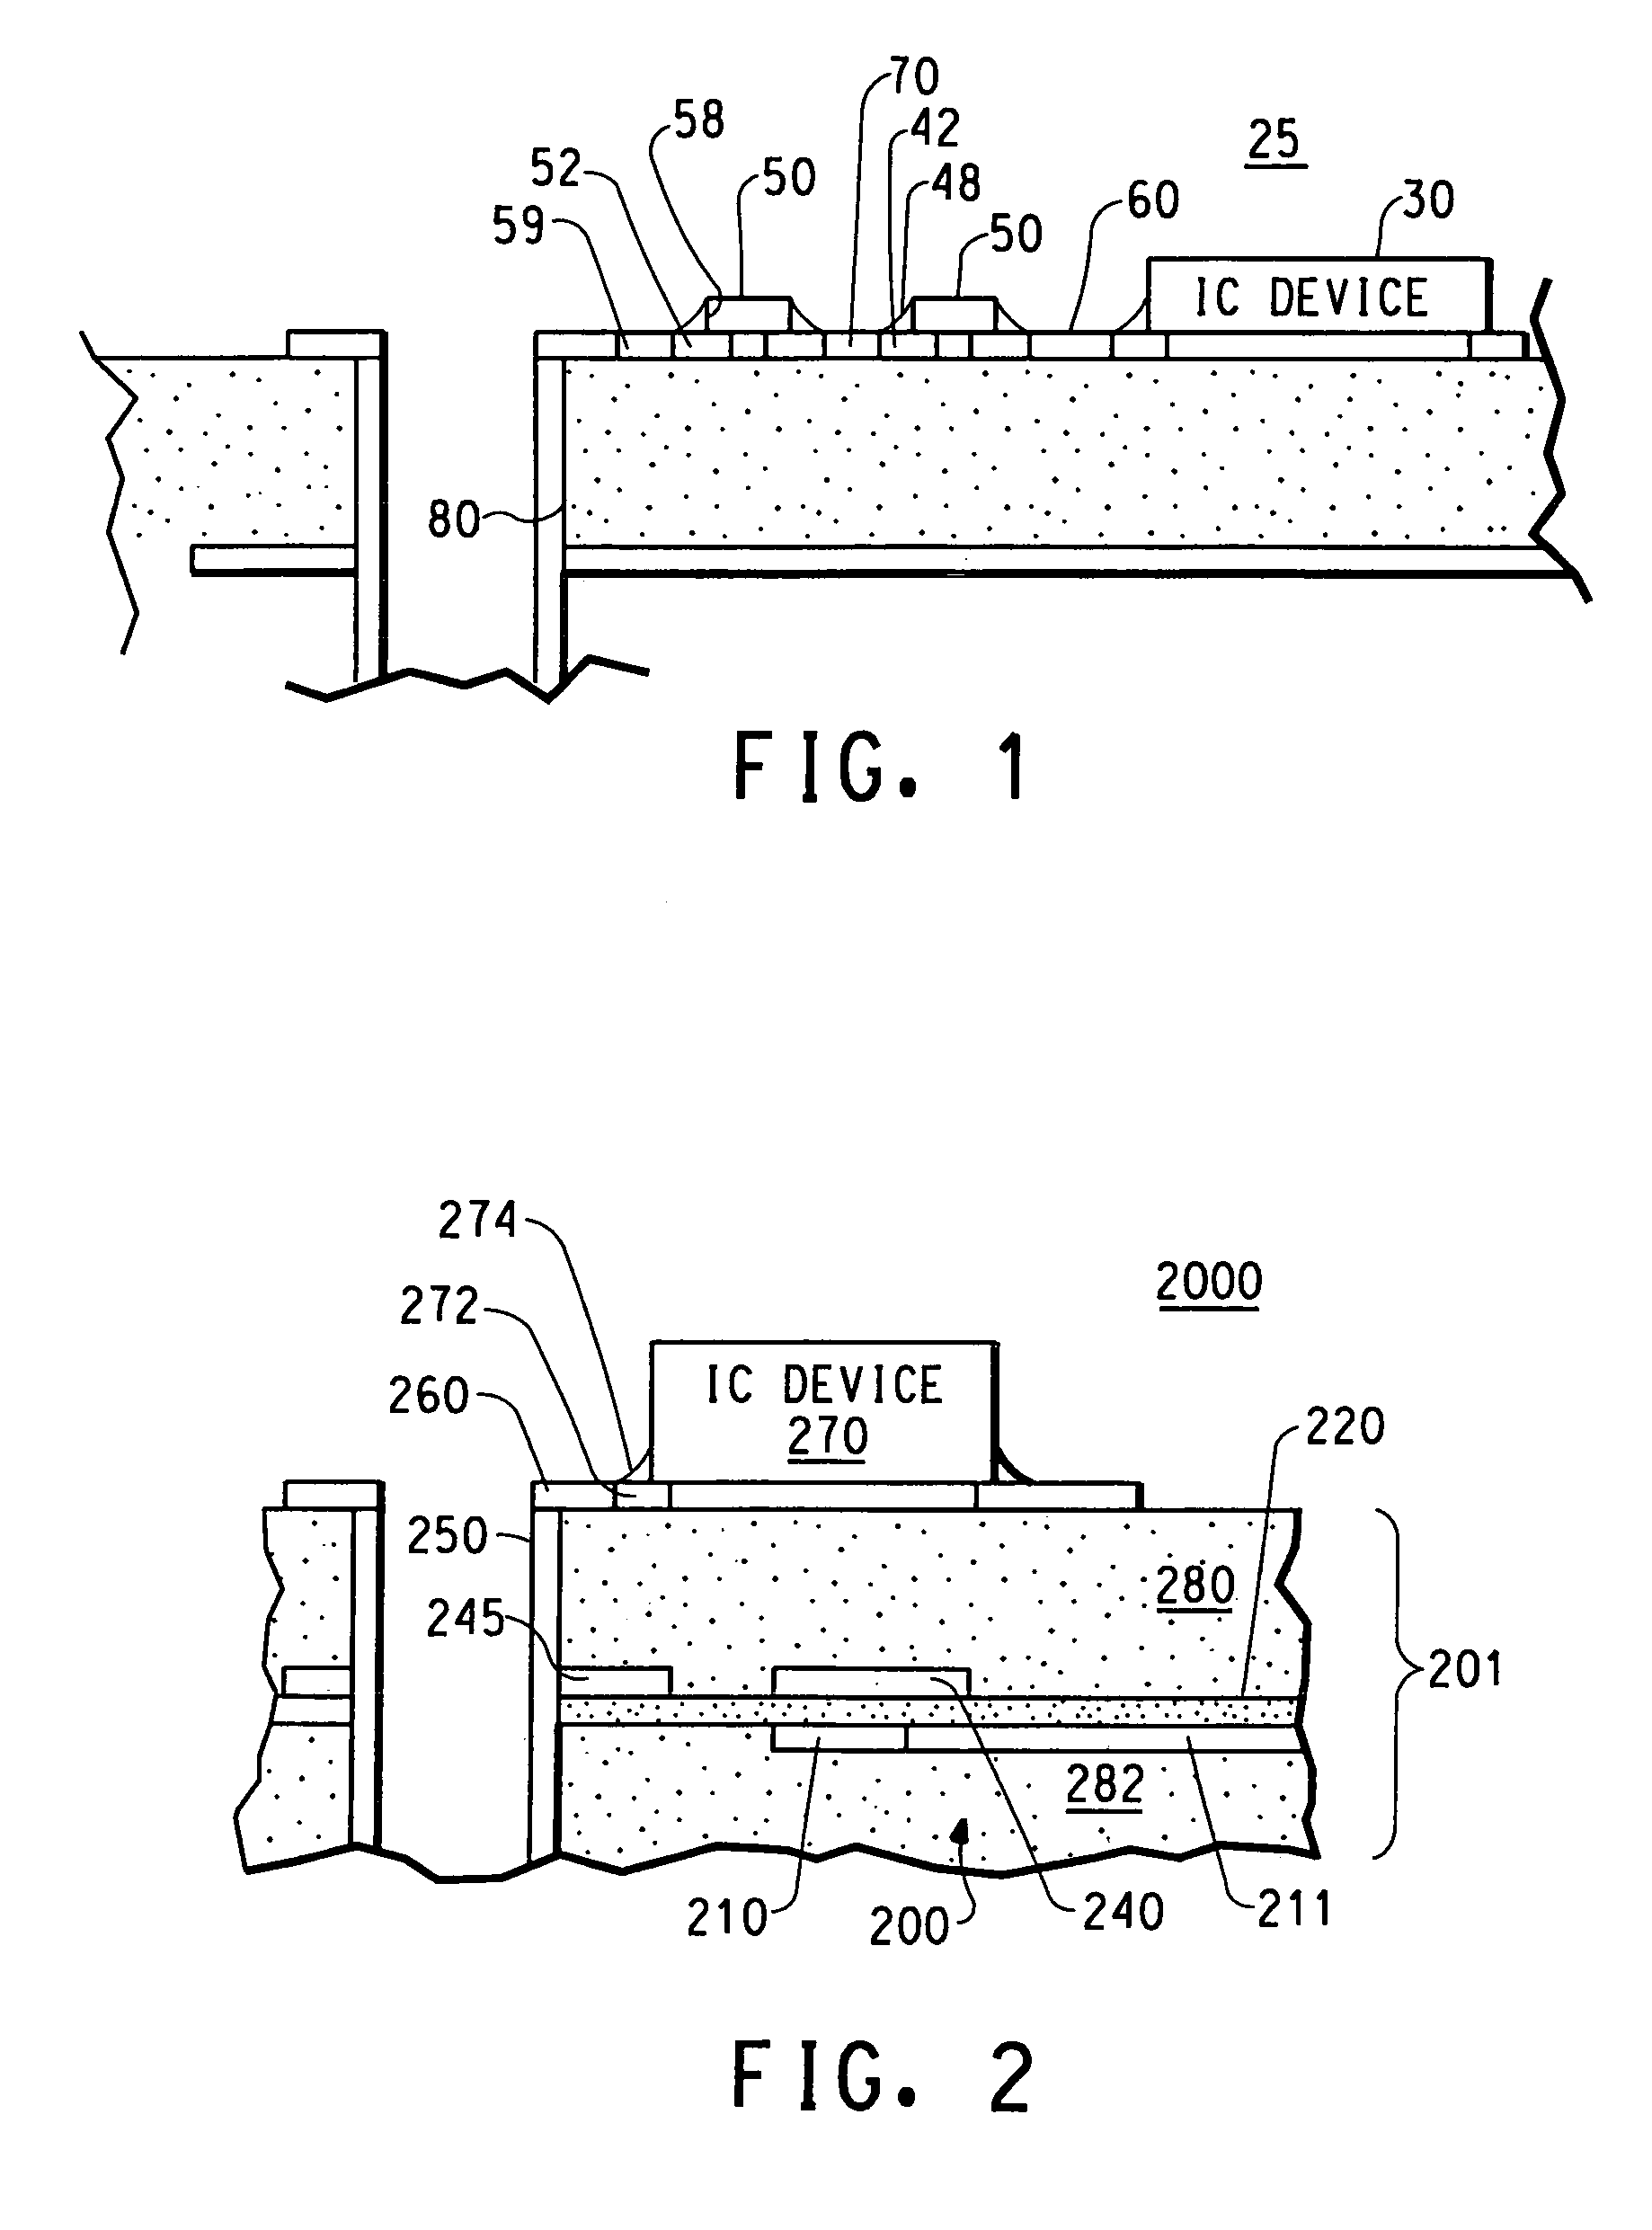 Capacitive devices, organic dielectric laminates, and printed wiring boards incorporating such devices, and methods of making thereof